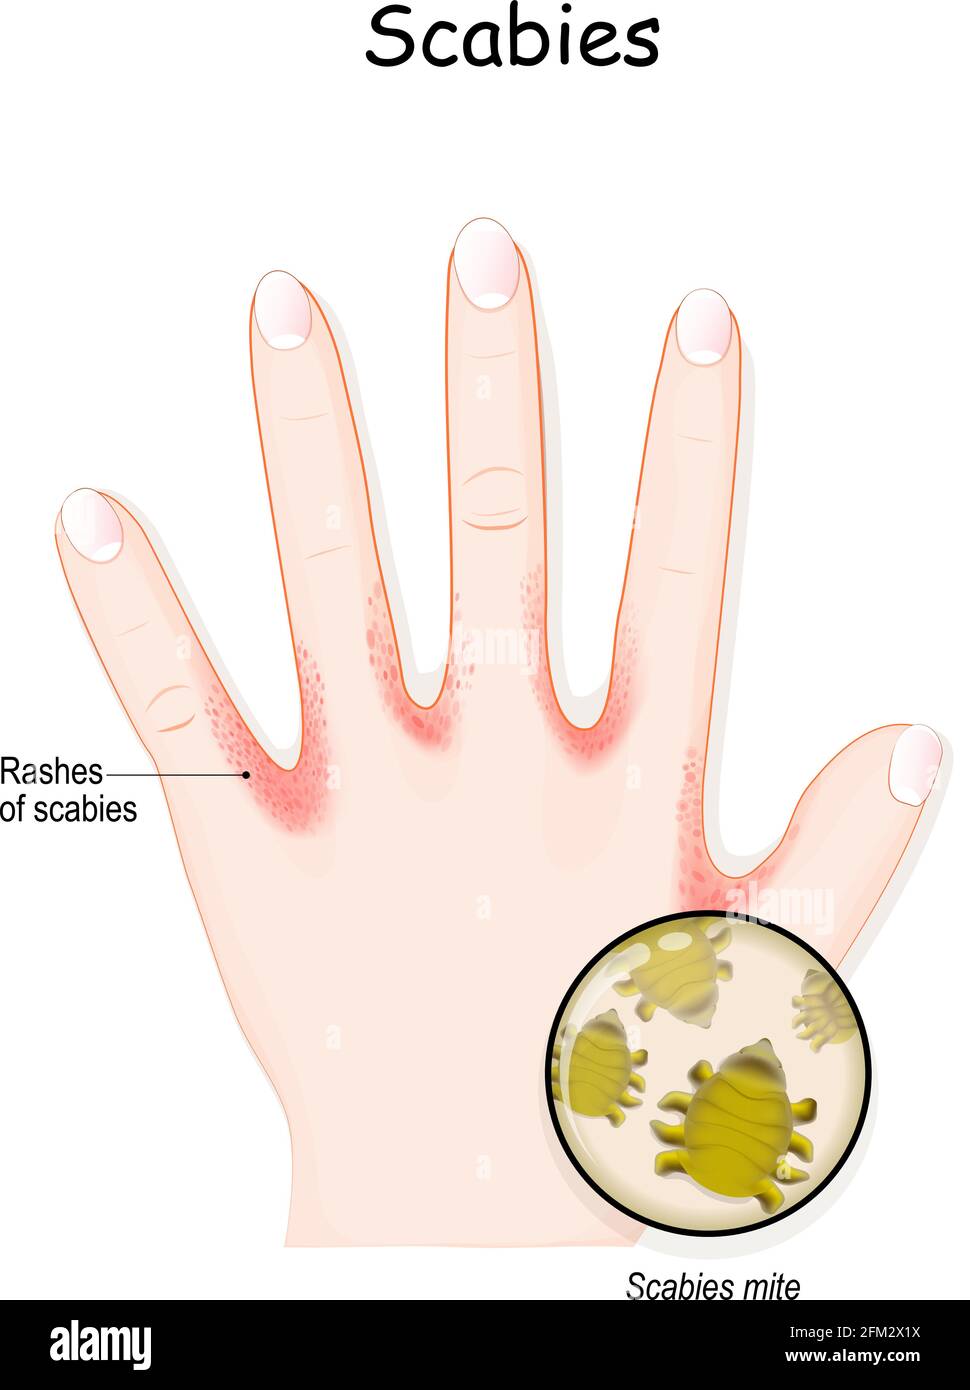 https://c8.alamy.com/comp/2FM2X1X/scabies-mite-humans-hand-skin-with-rashes-seven-year-itch-is-a-contagious-skin-infestation-by-the-mite-sarcoptes-scabiei-close-up-of-scabies-mite-2FM2X1X.jpg